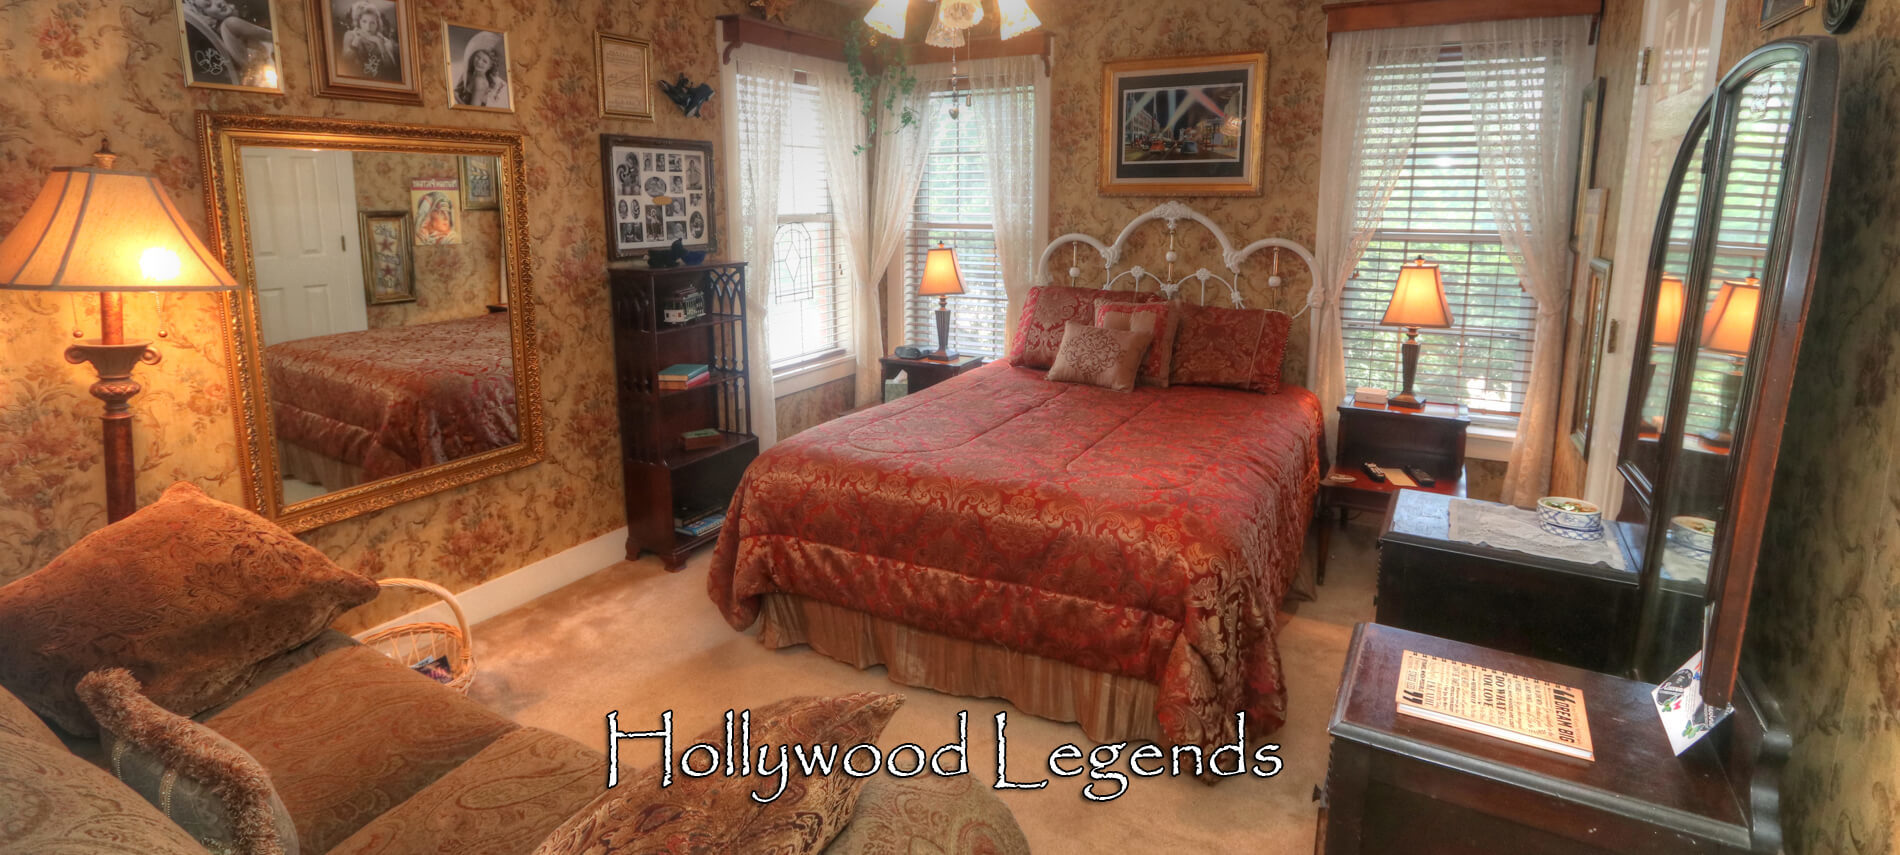 Hollywood Legends room with bed, love seat and dresser with mirror